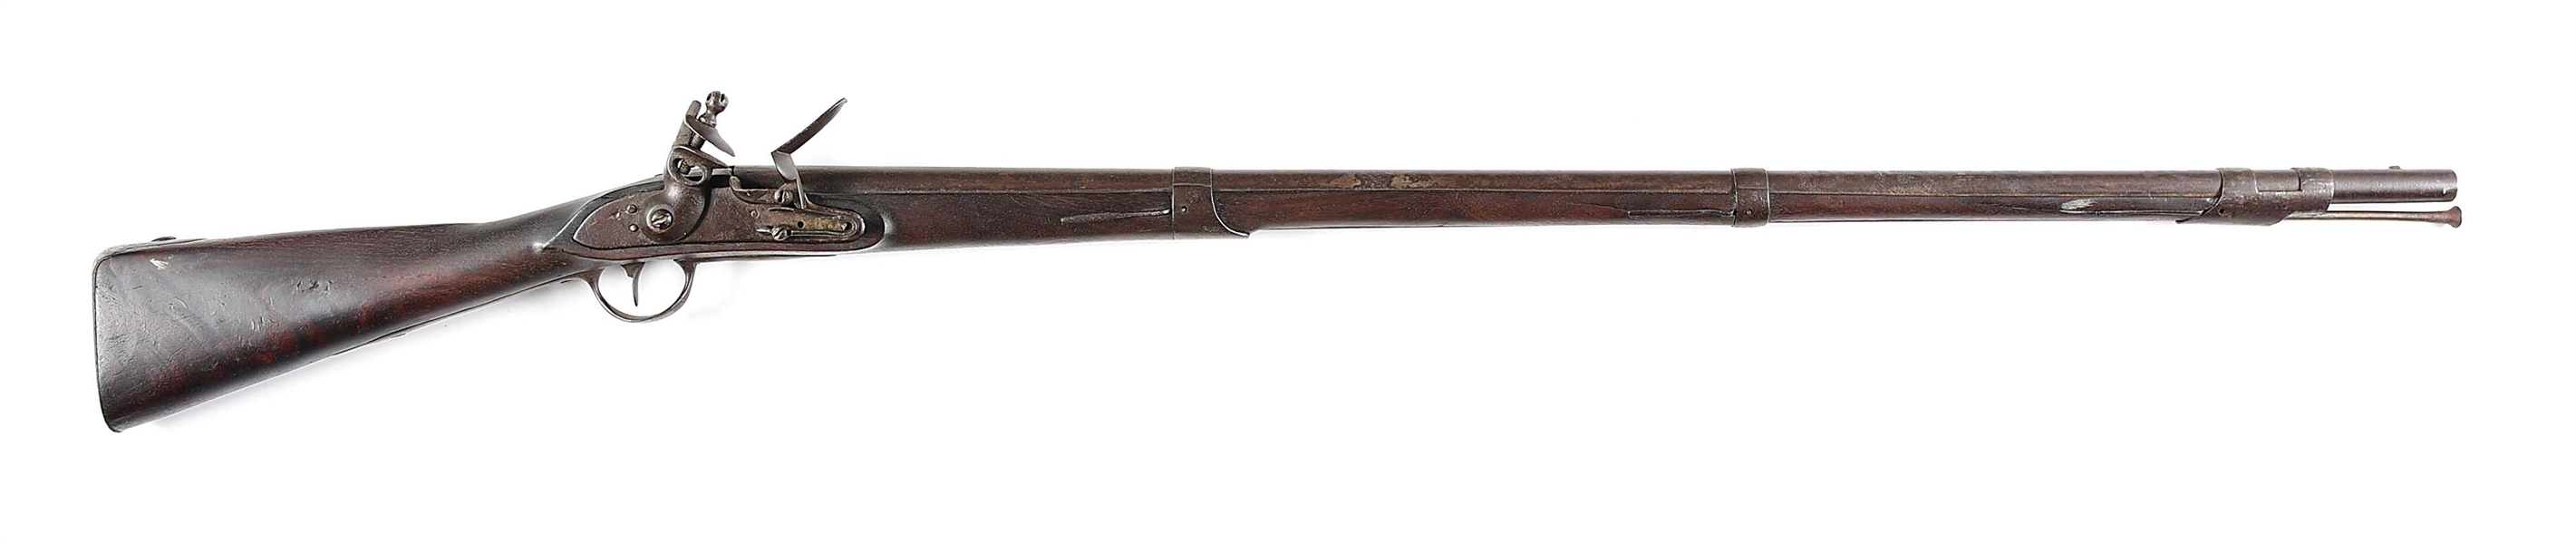 (A) UNMARKED MODEL 1812 FLINTLOCK .69 CALIBER CONTRACT RIFLE.